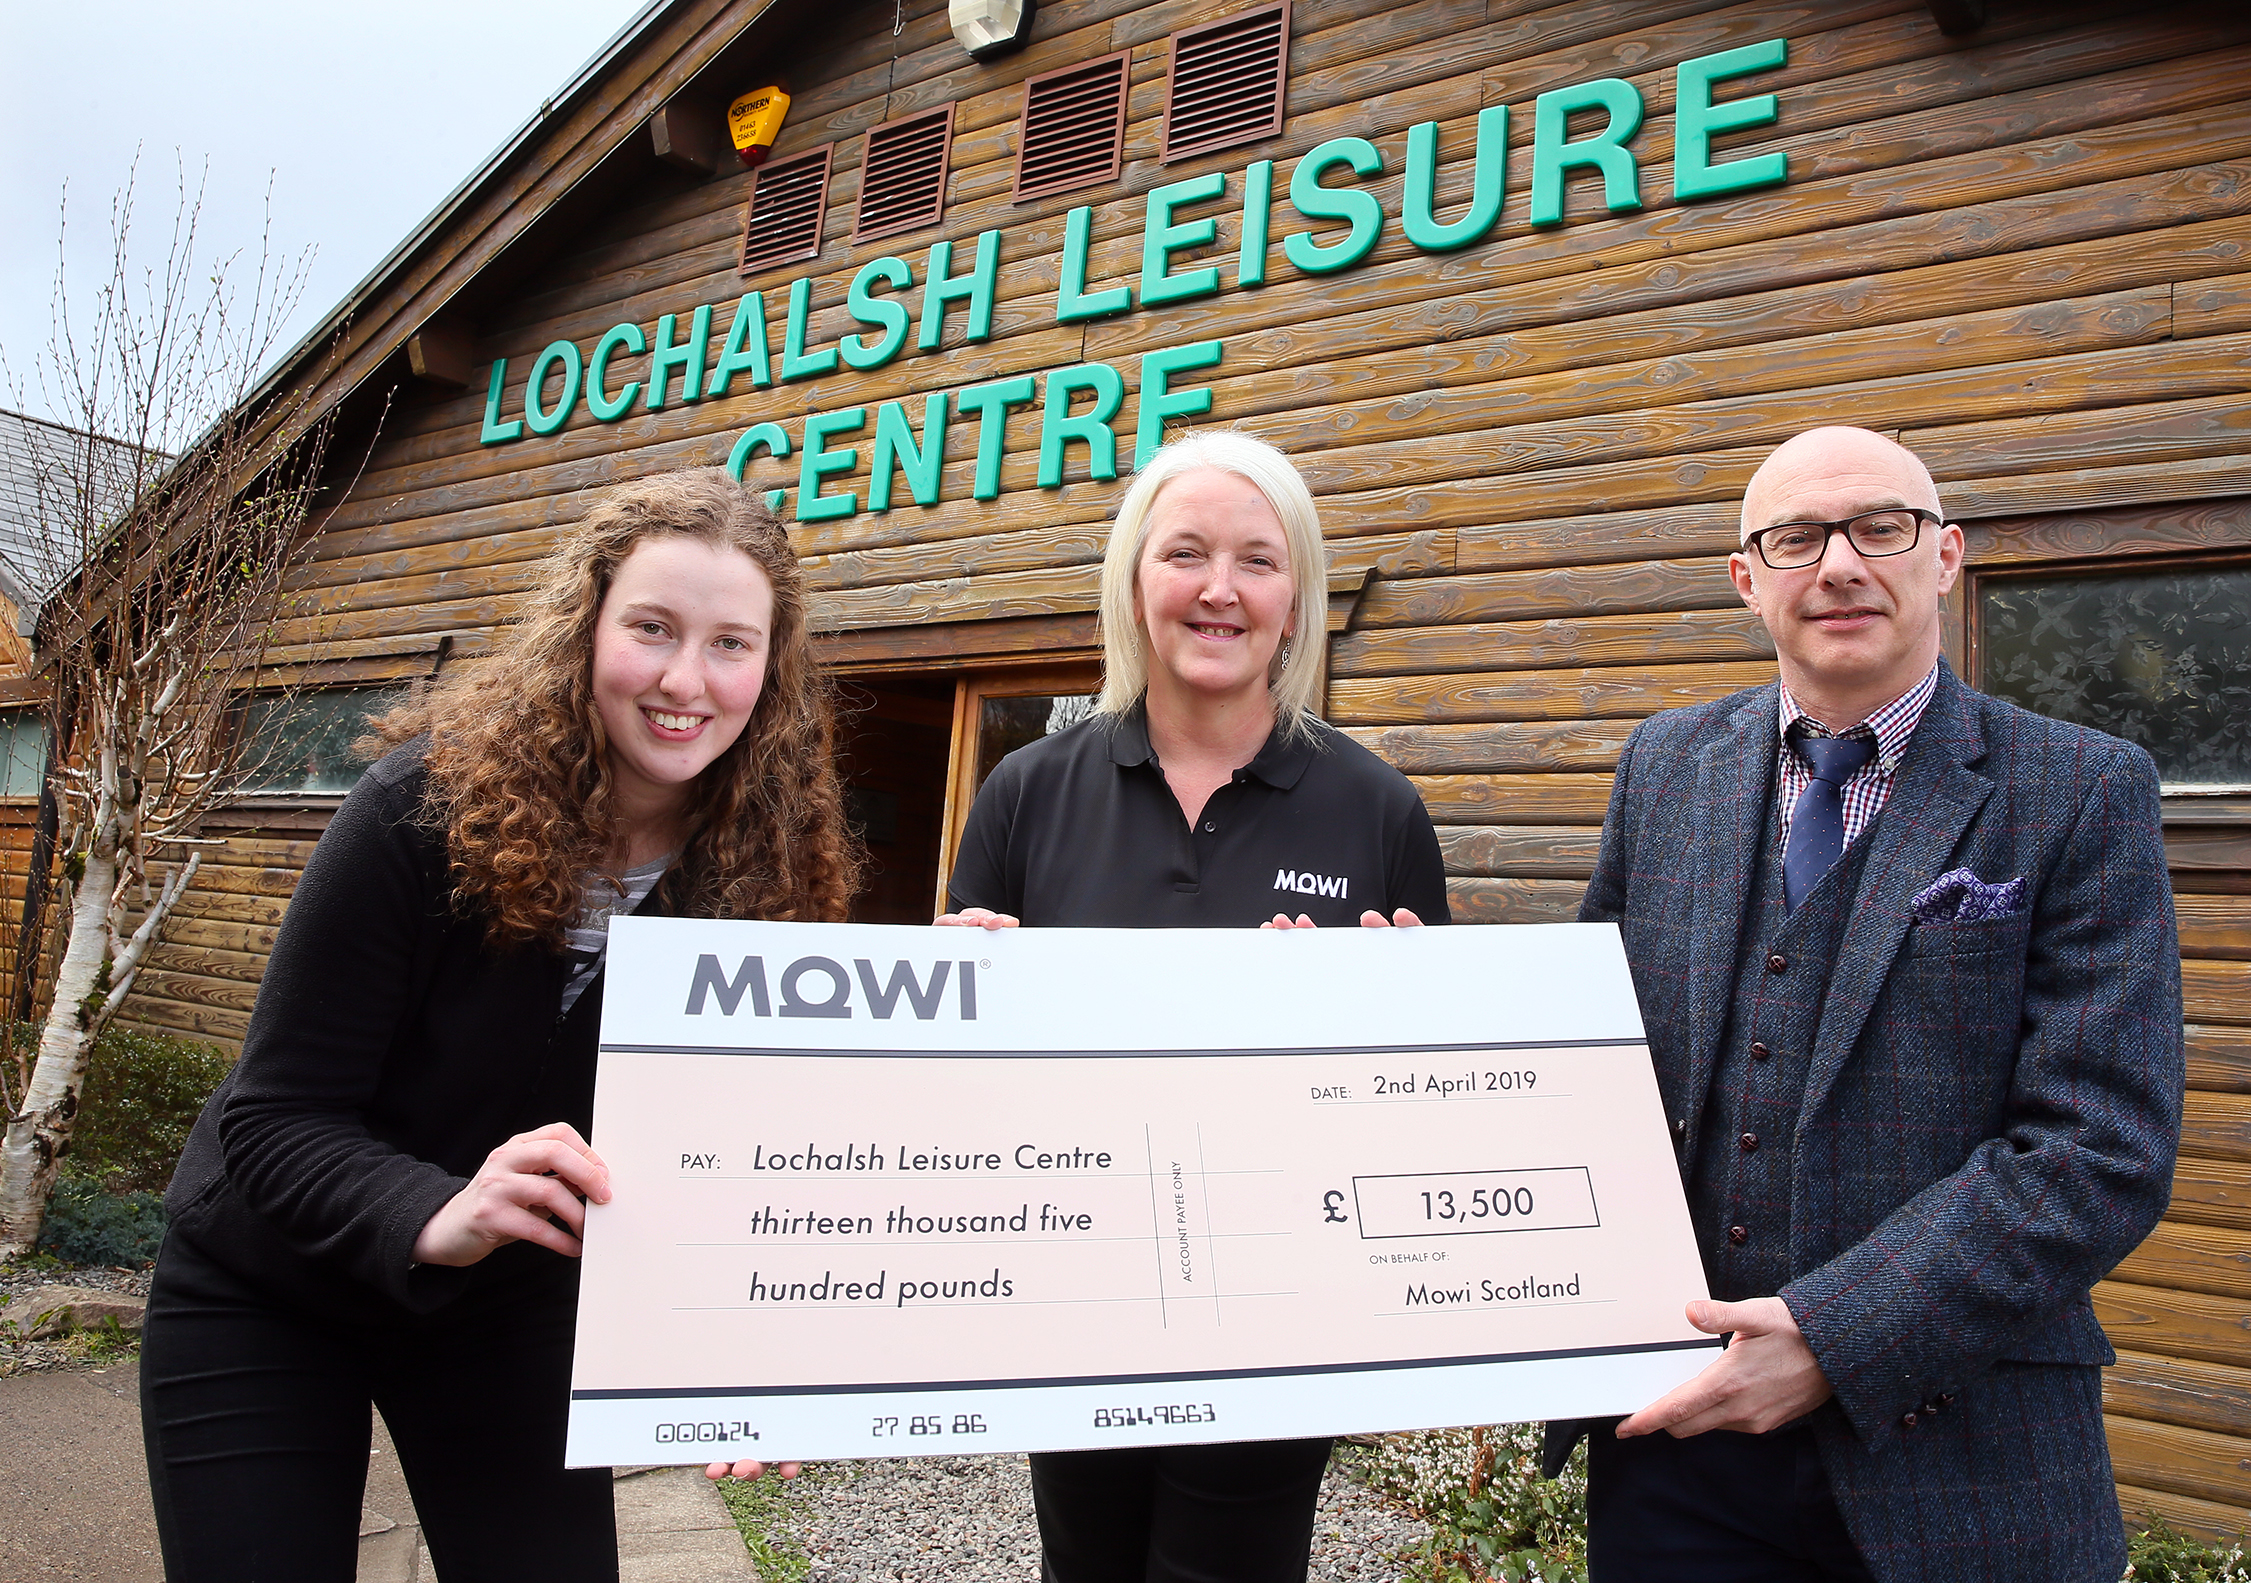 Kendal Hunter and Heather O’Neill of Mowi present half of the fundraising total to Paul Wood, chairman of the Lochalsh Leisure Centre